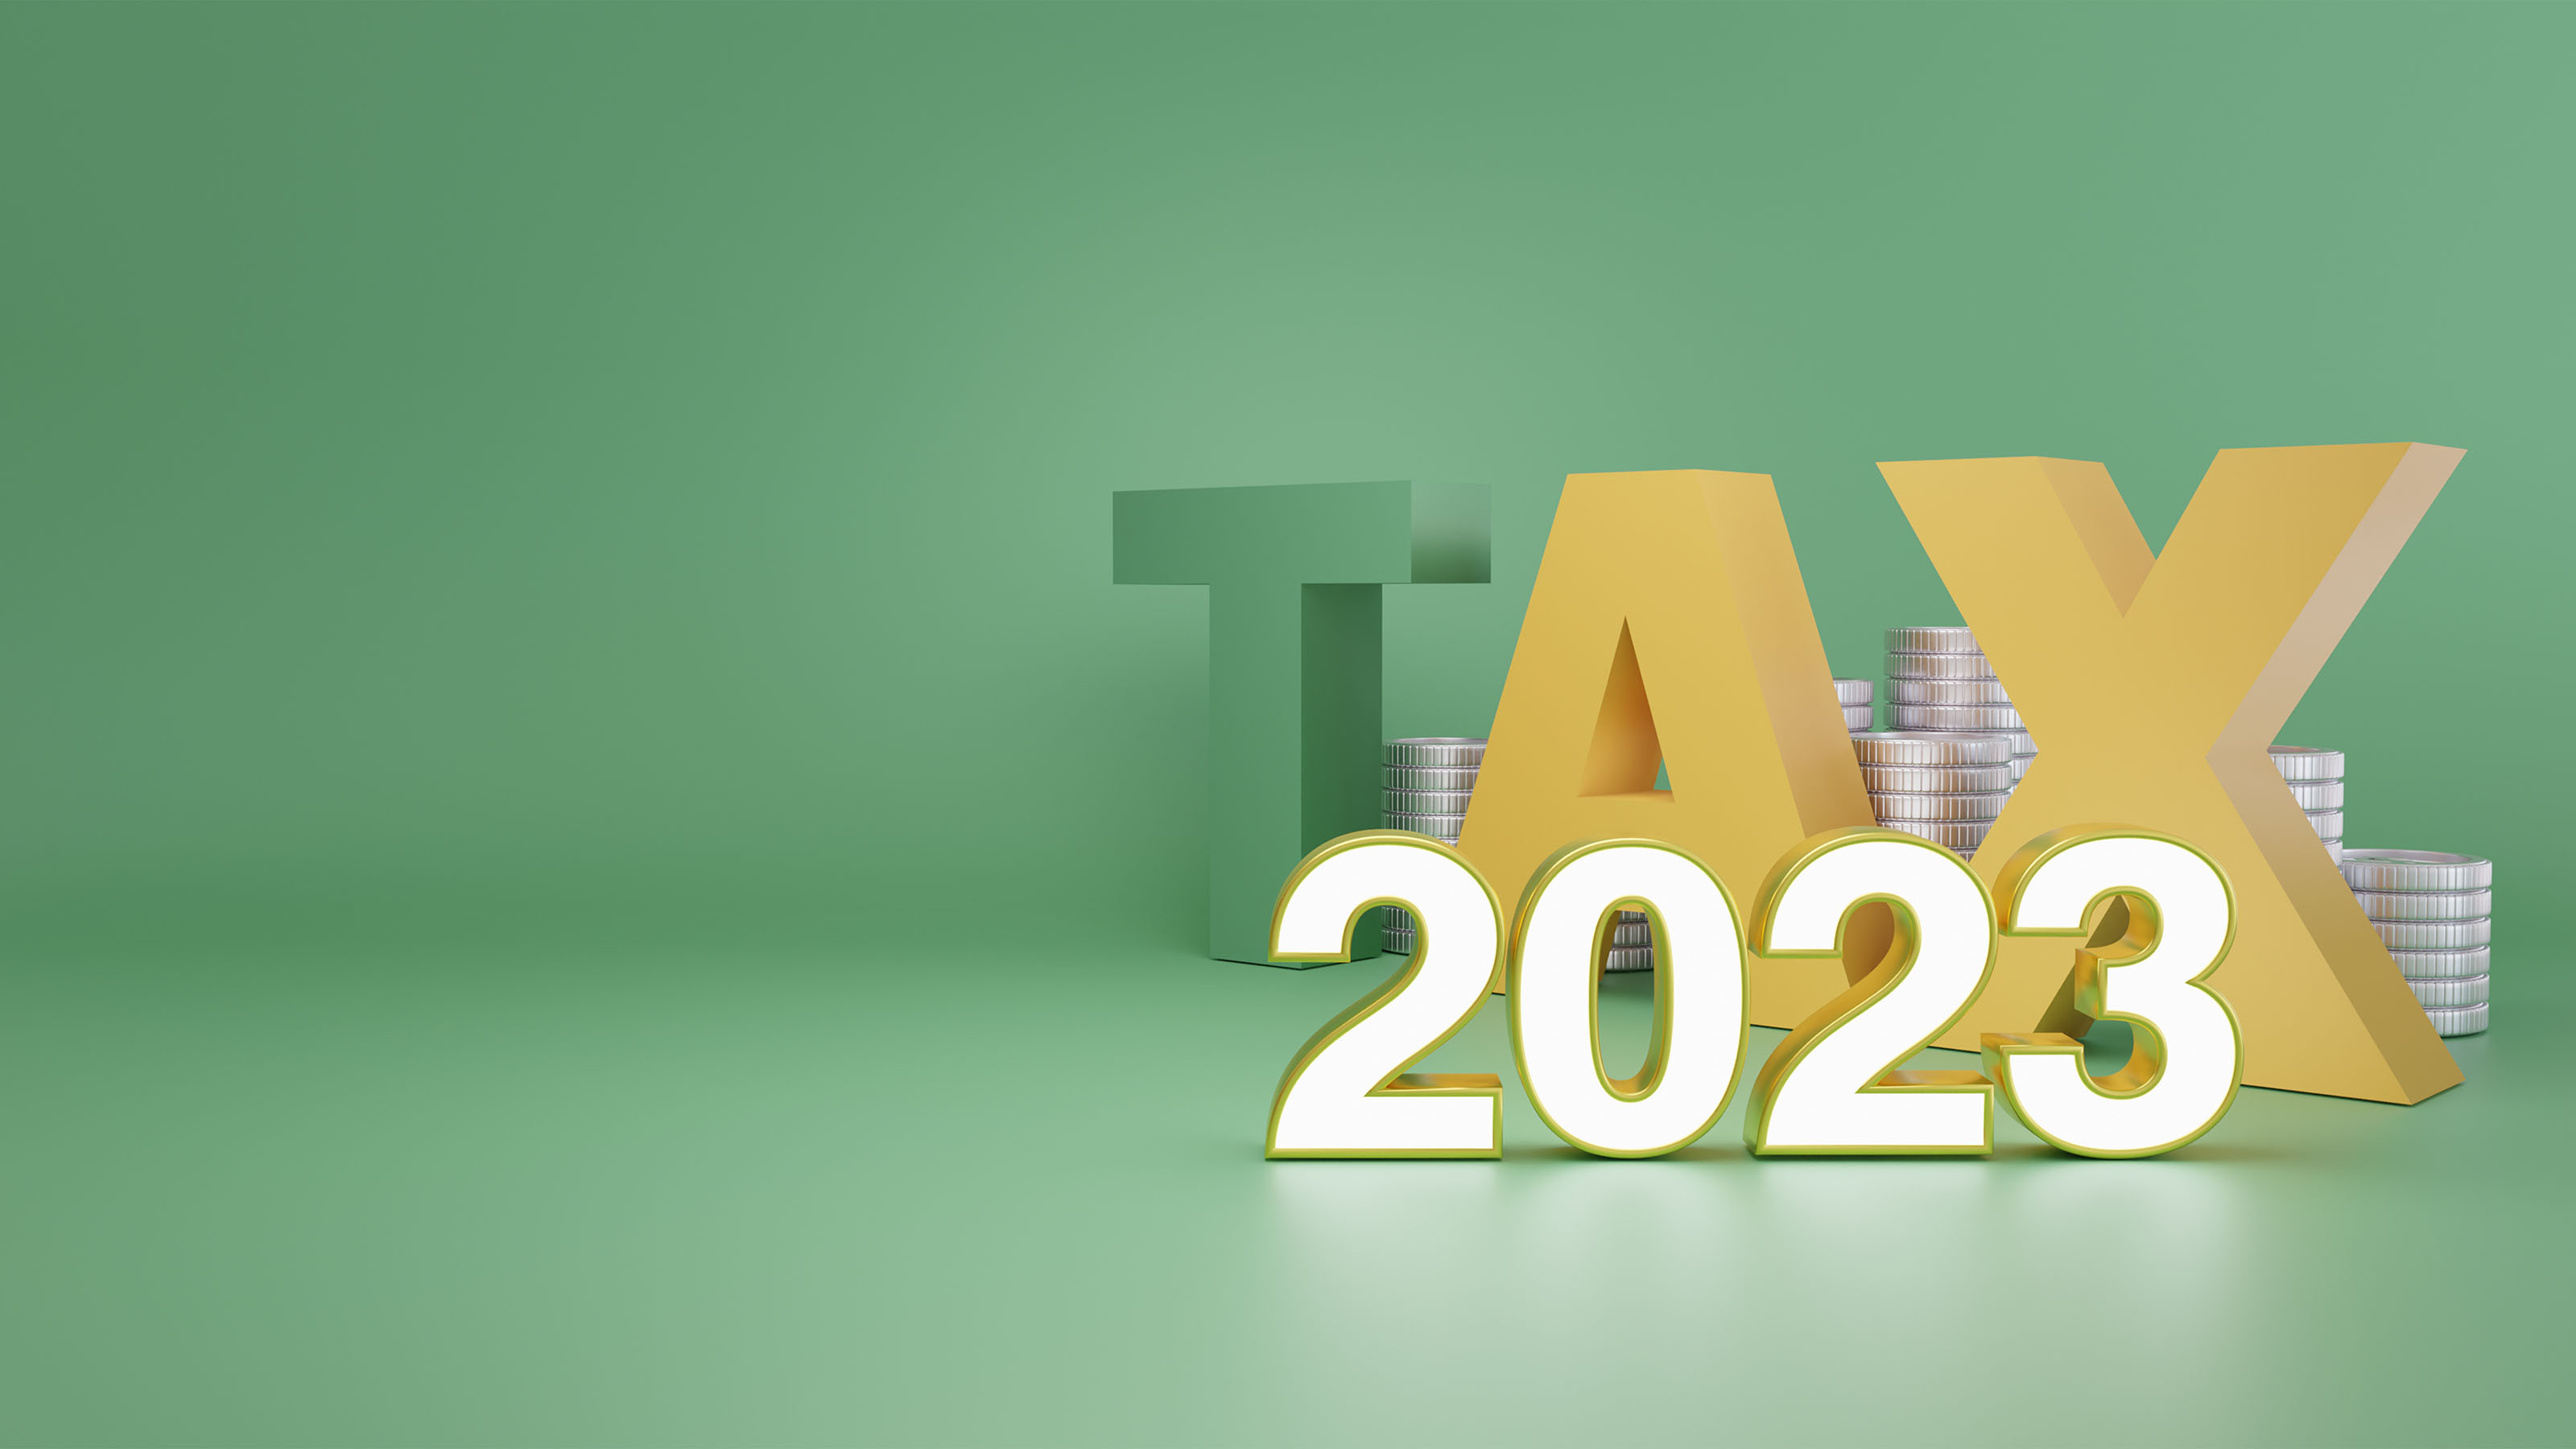 What are FICA Taxes? 2022-2023 Rates and Instructions